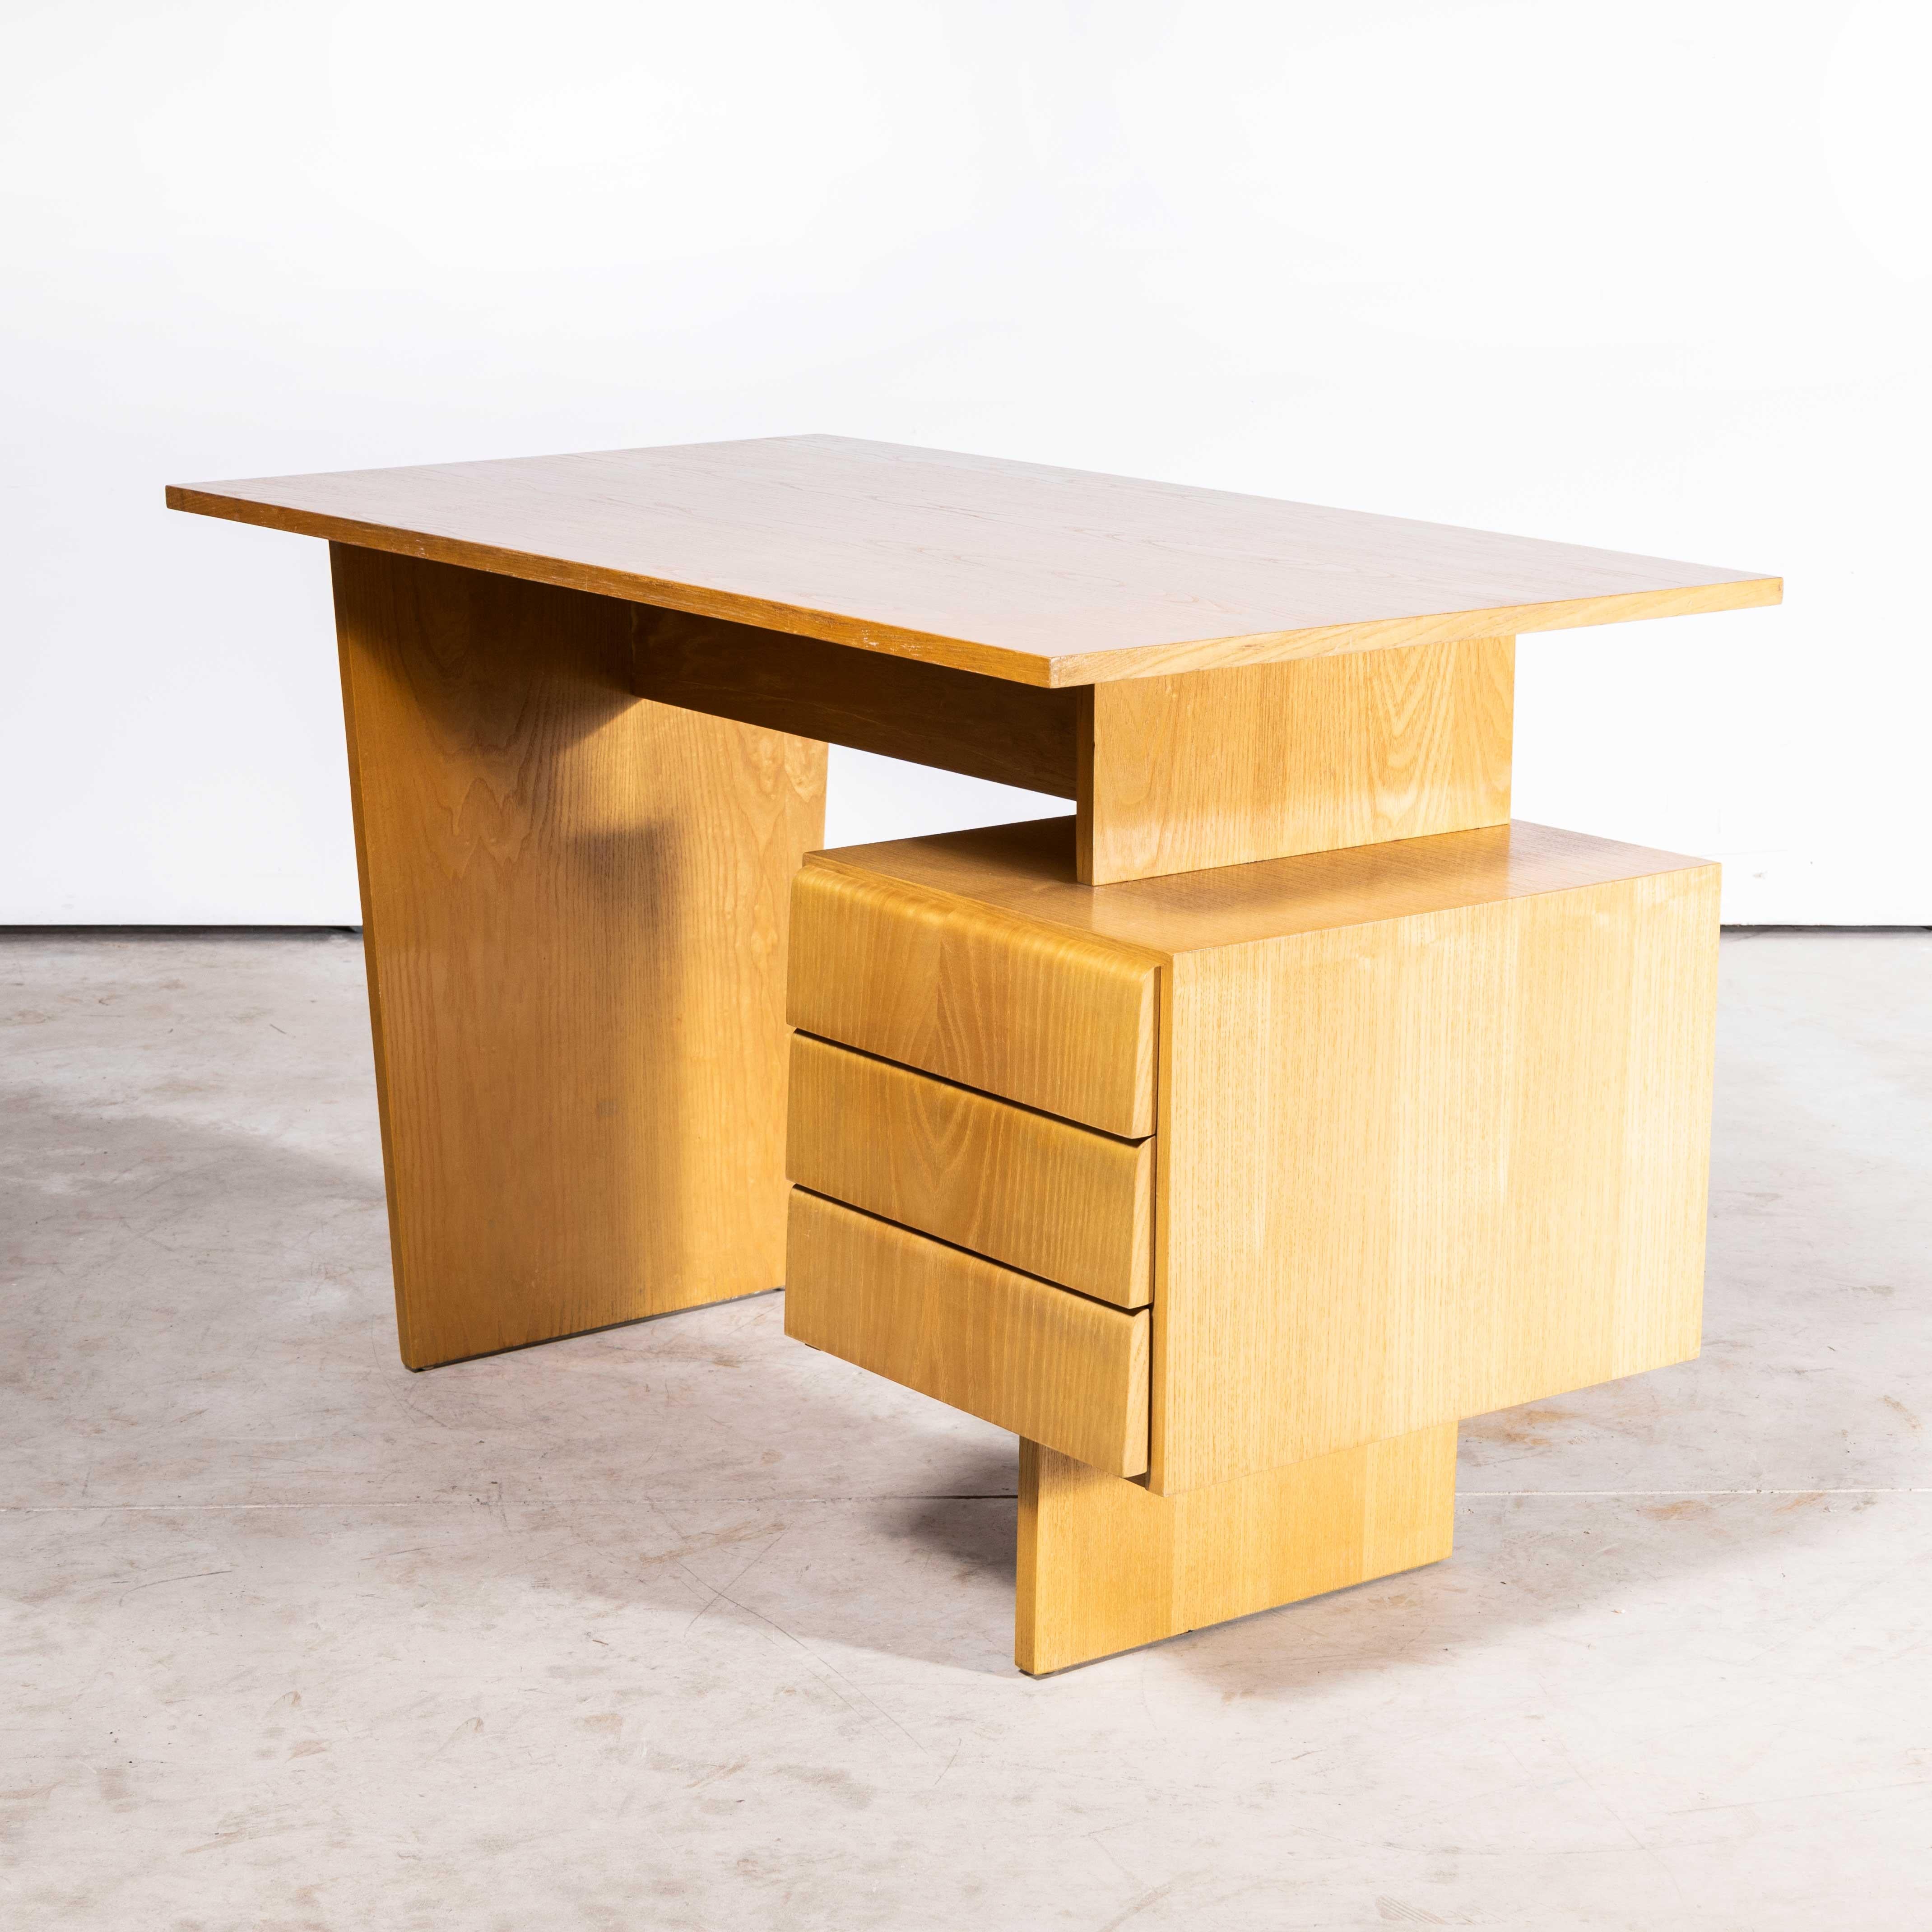 Czech 1950s Blonde Ash Desk with Integrated Three Drawer Cluster